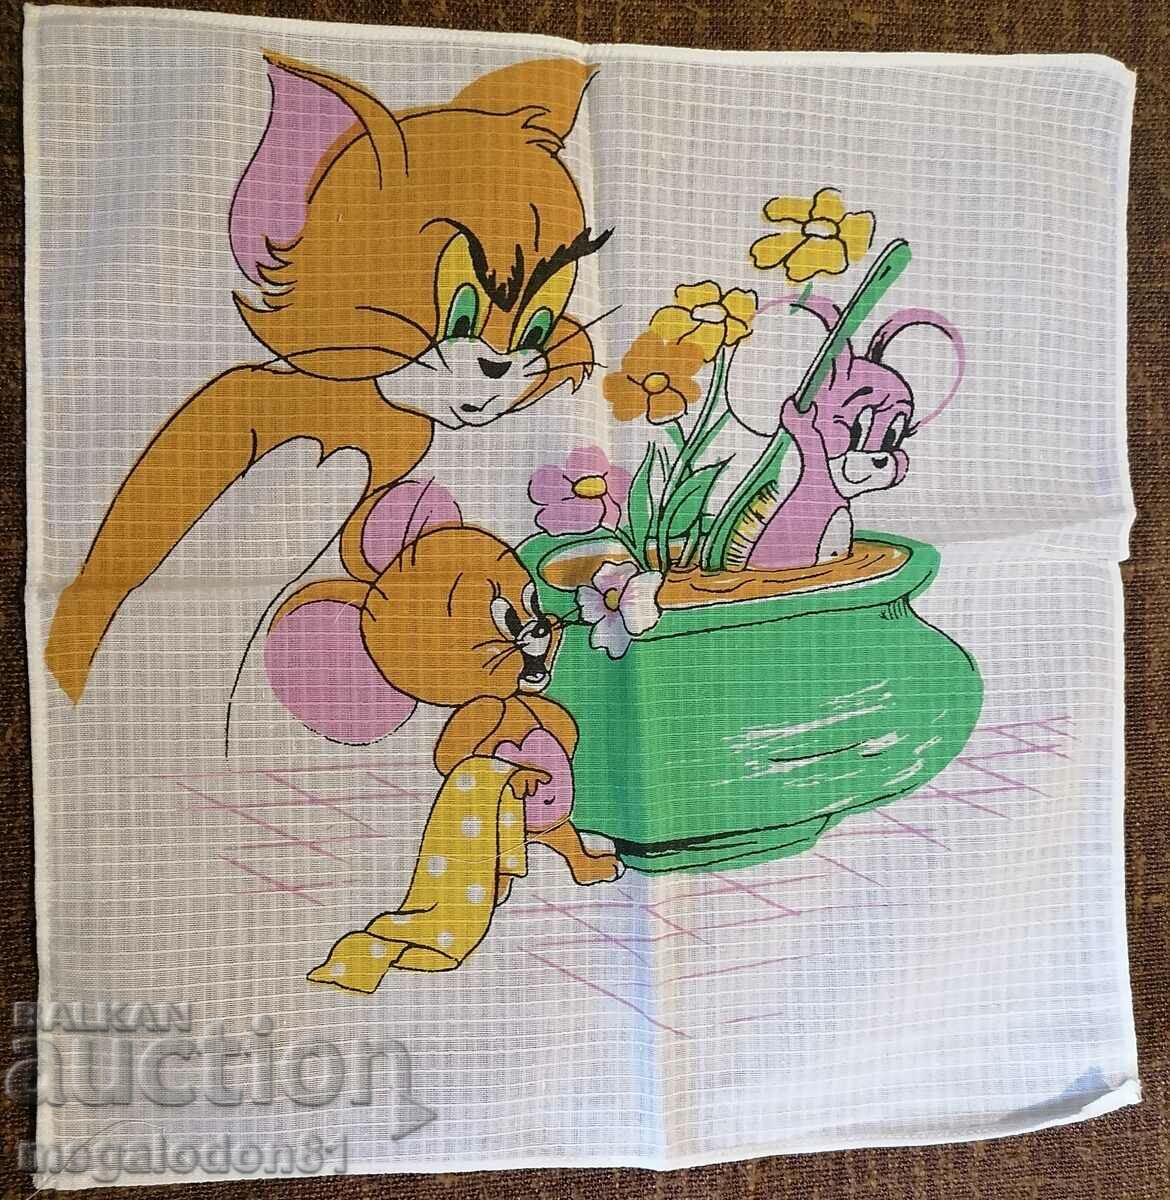 Old handkerchief, Tom and Jerry